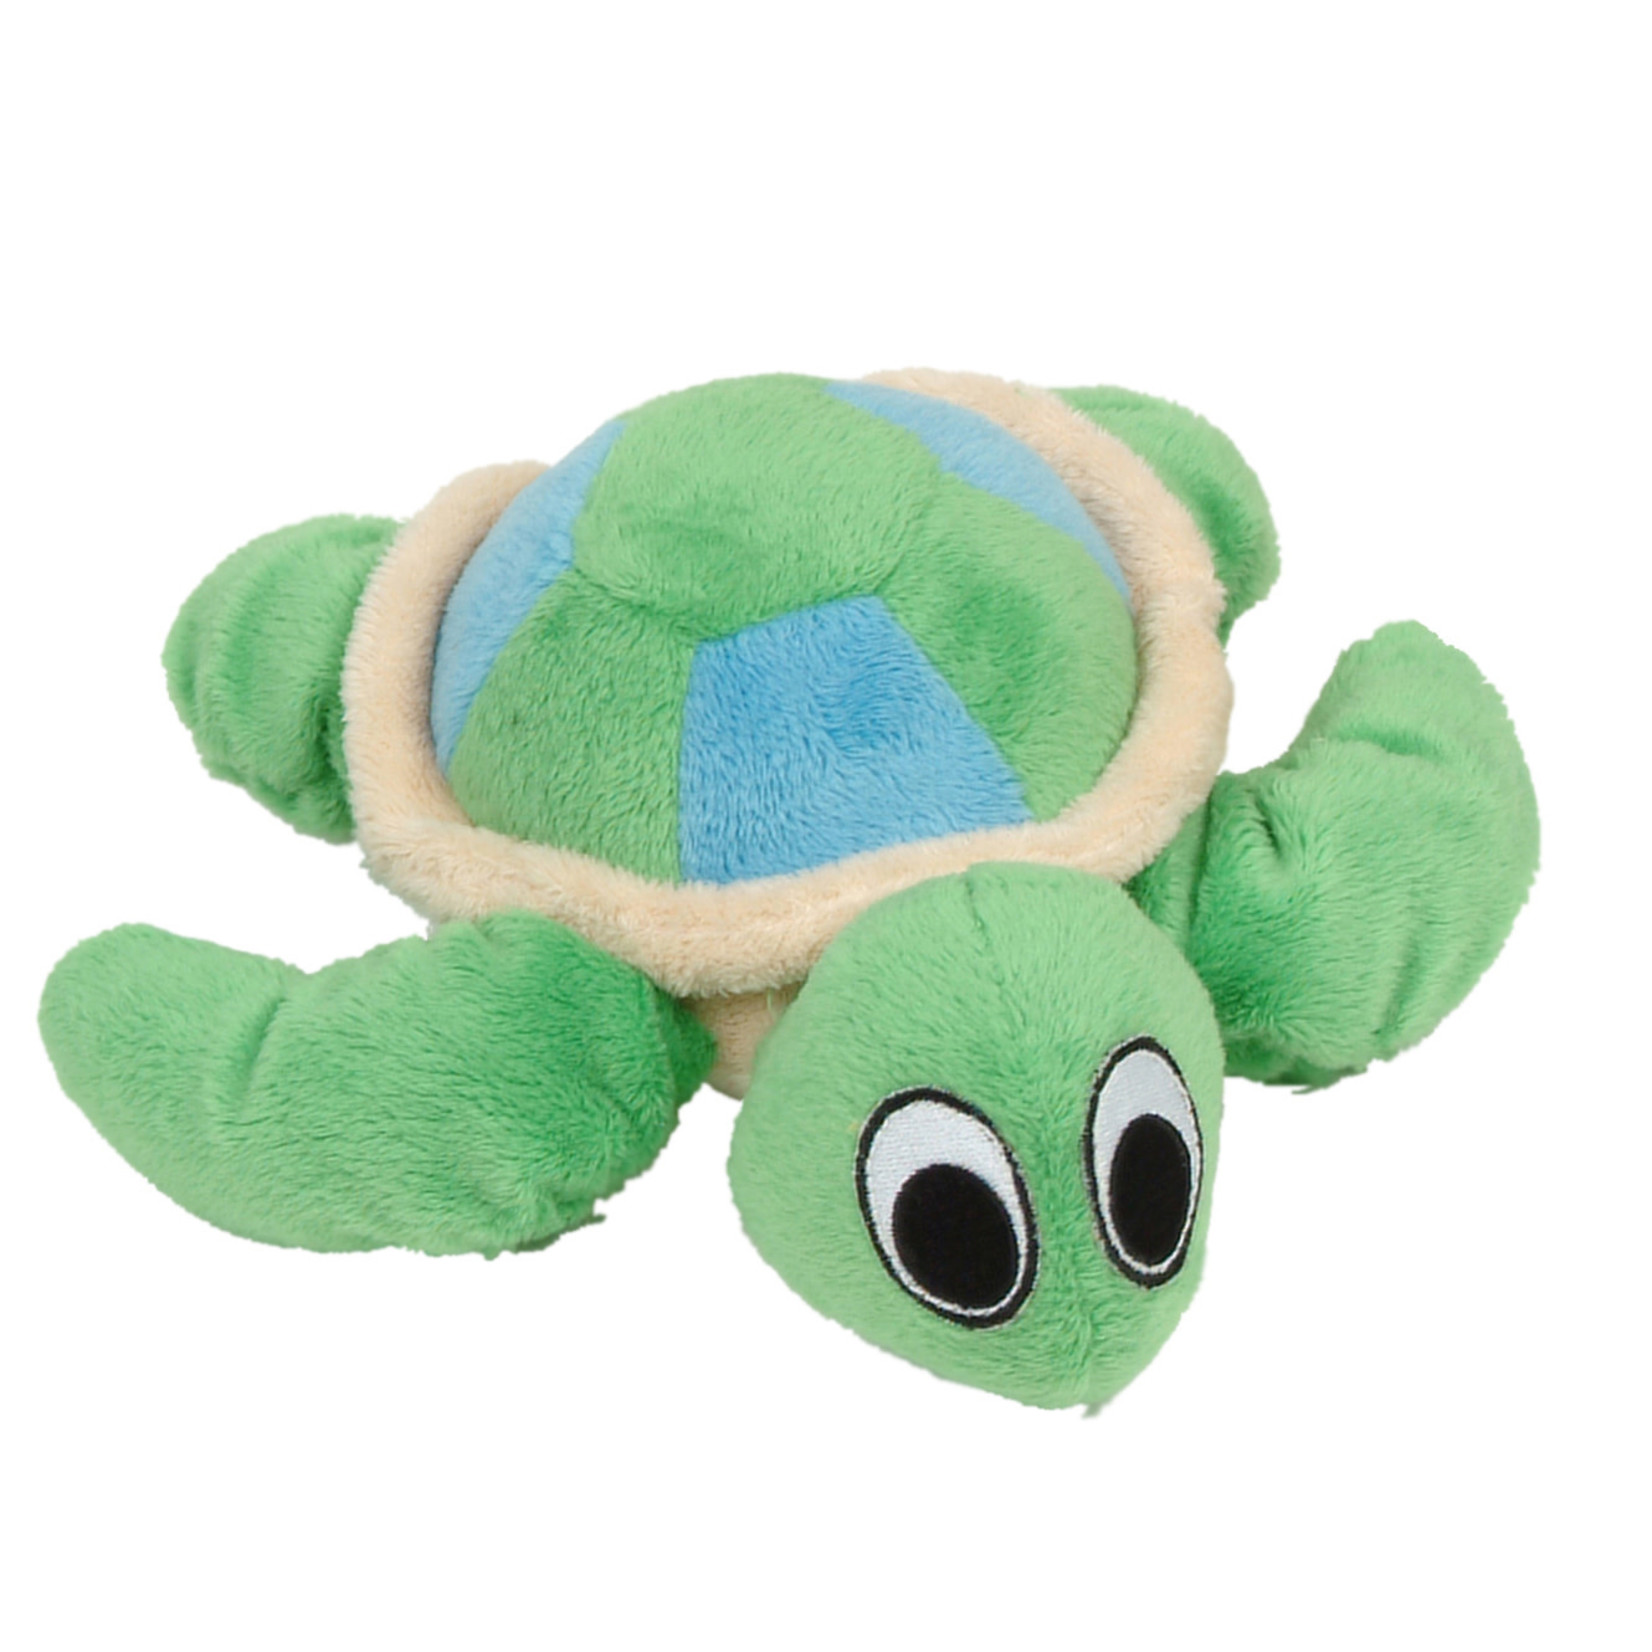 DOG IT (W) Dogit inPuppy Luvzin Plush Dog Toy with Squeaker, Green Turtle